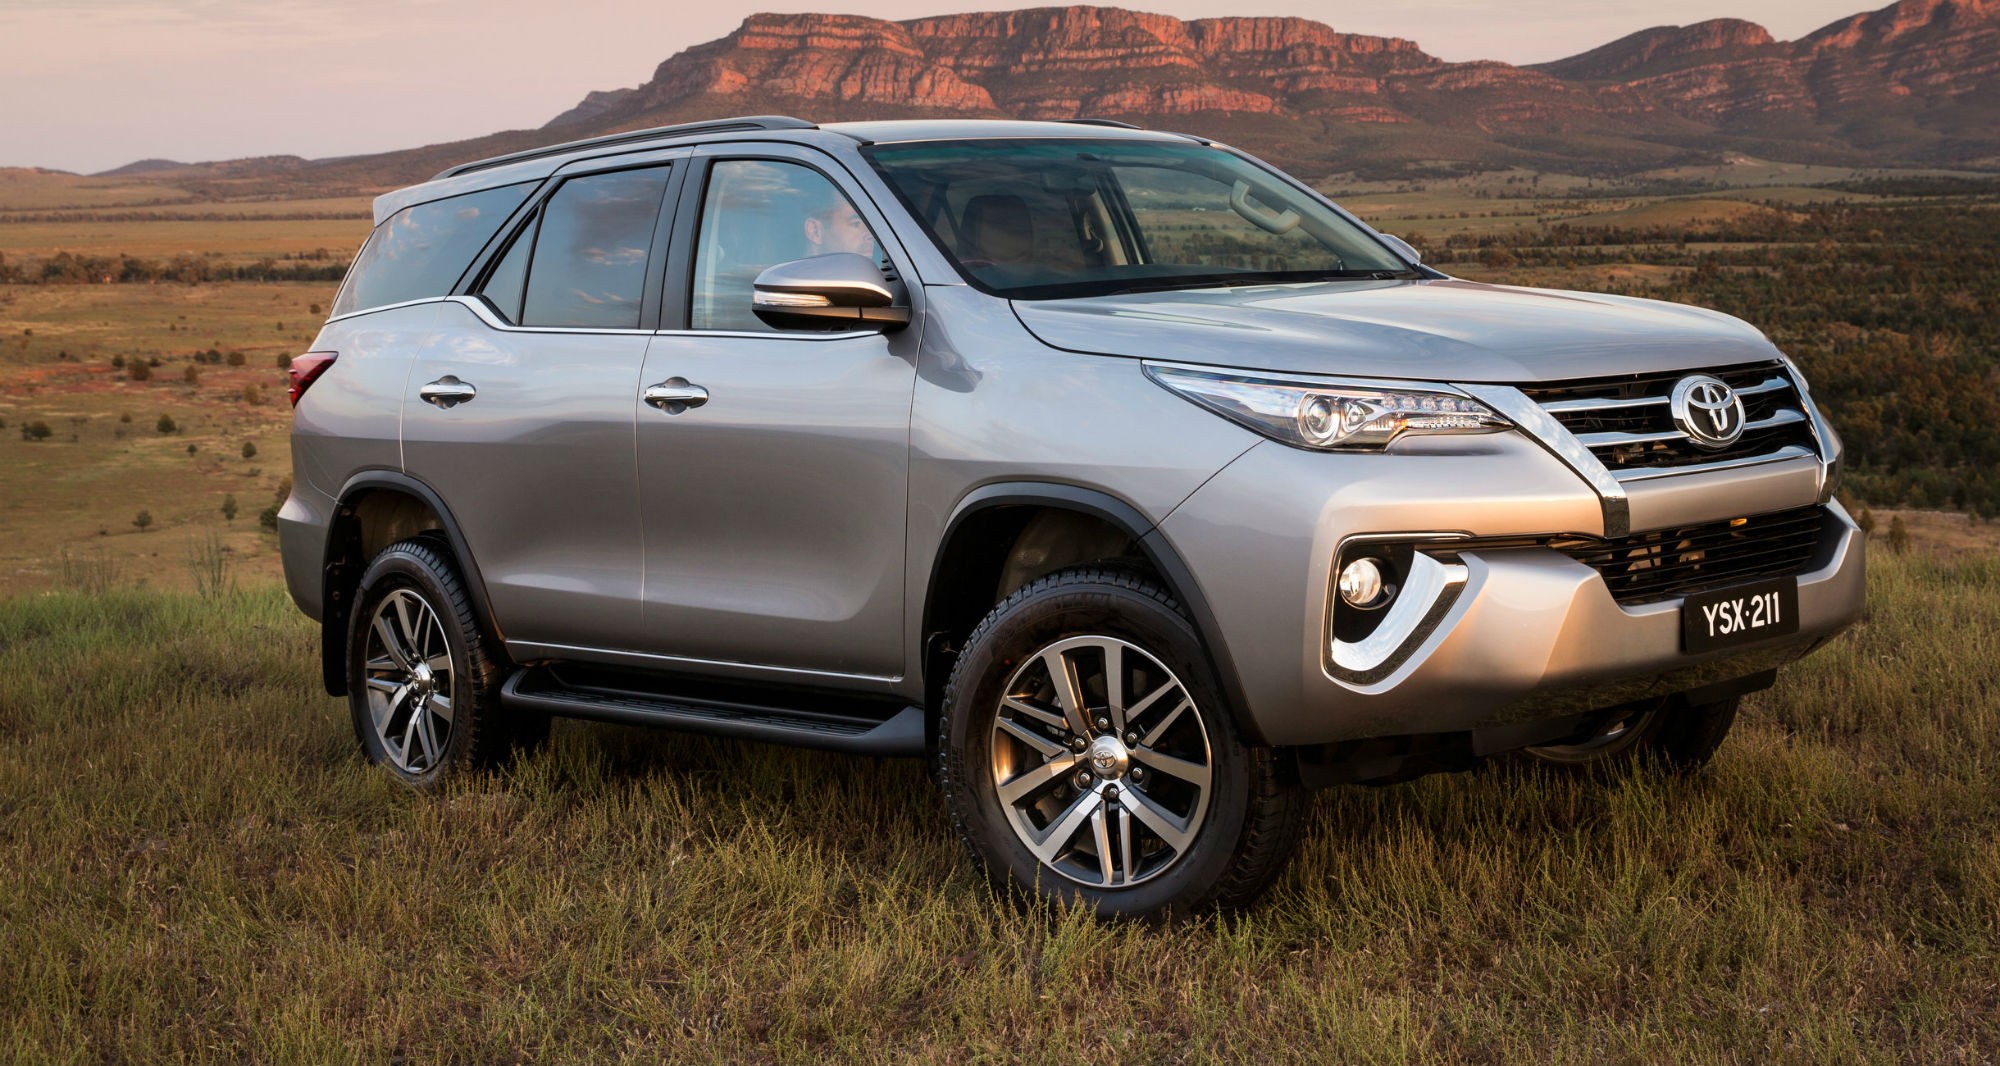 Advantages of the 2016 Toyota Fortuner